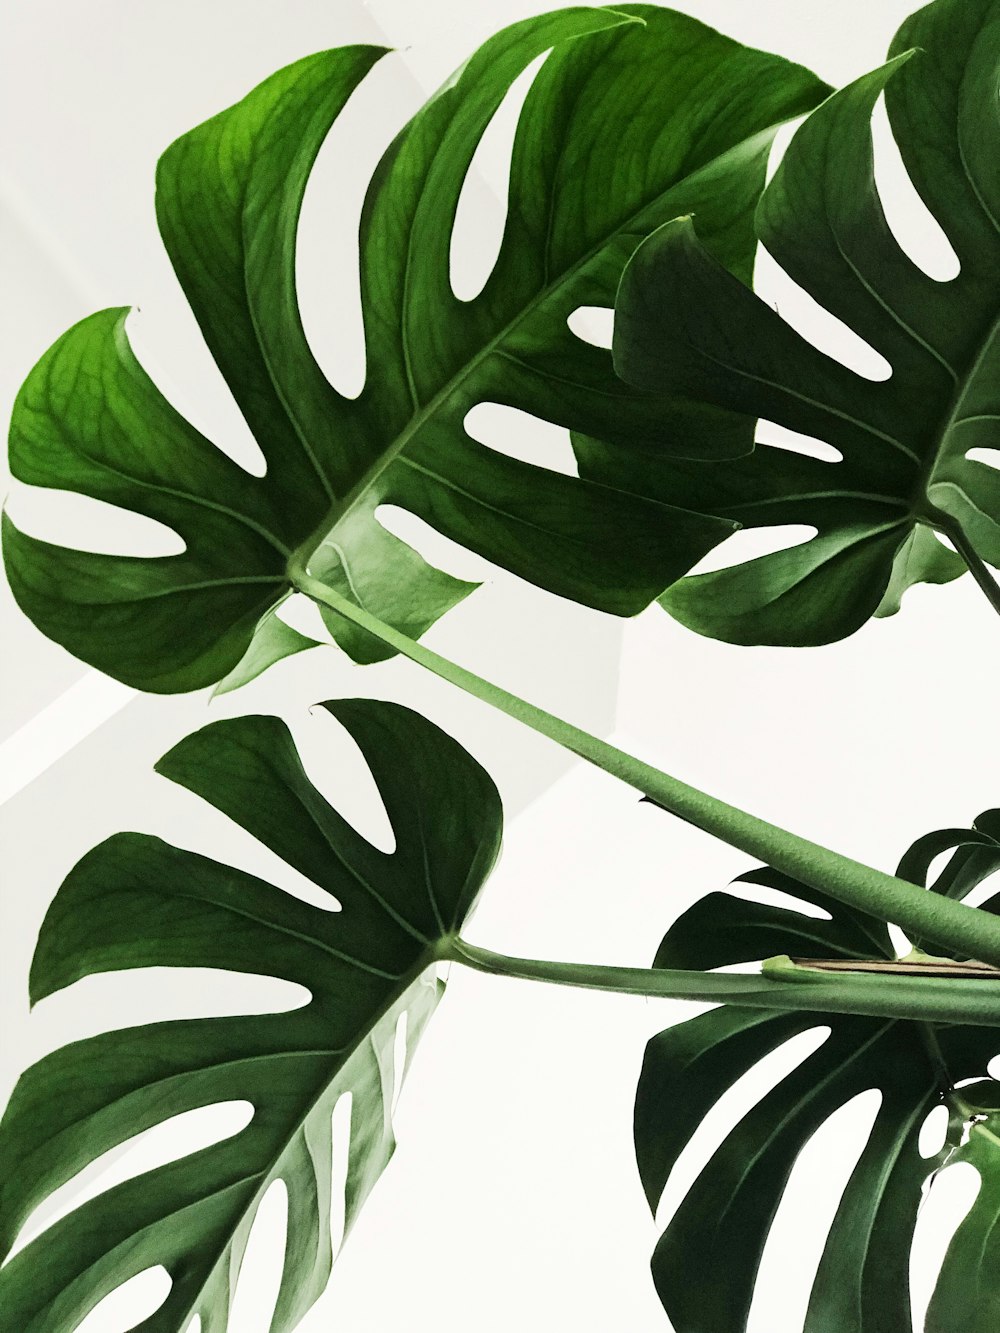 500+ Monstera Pictures | Download Free Images on Unsplash